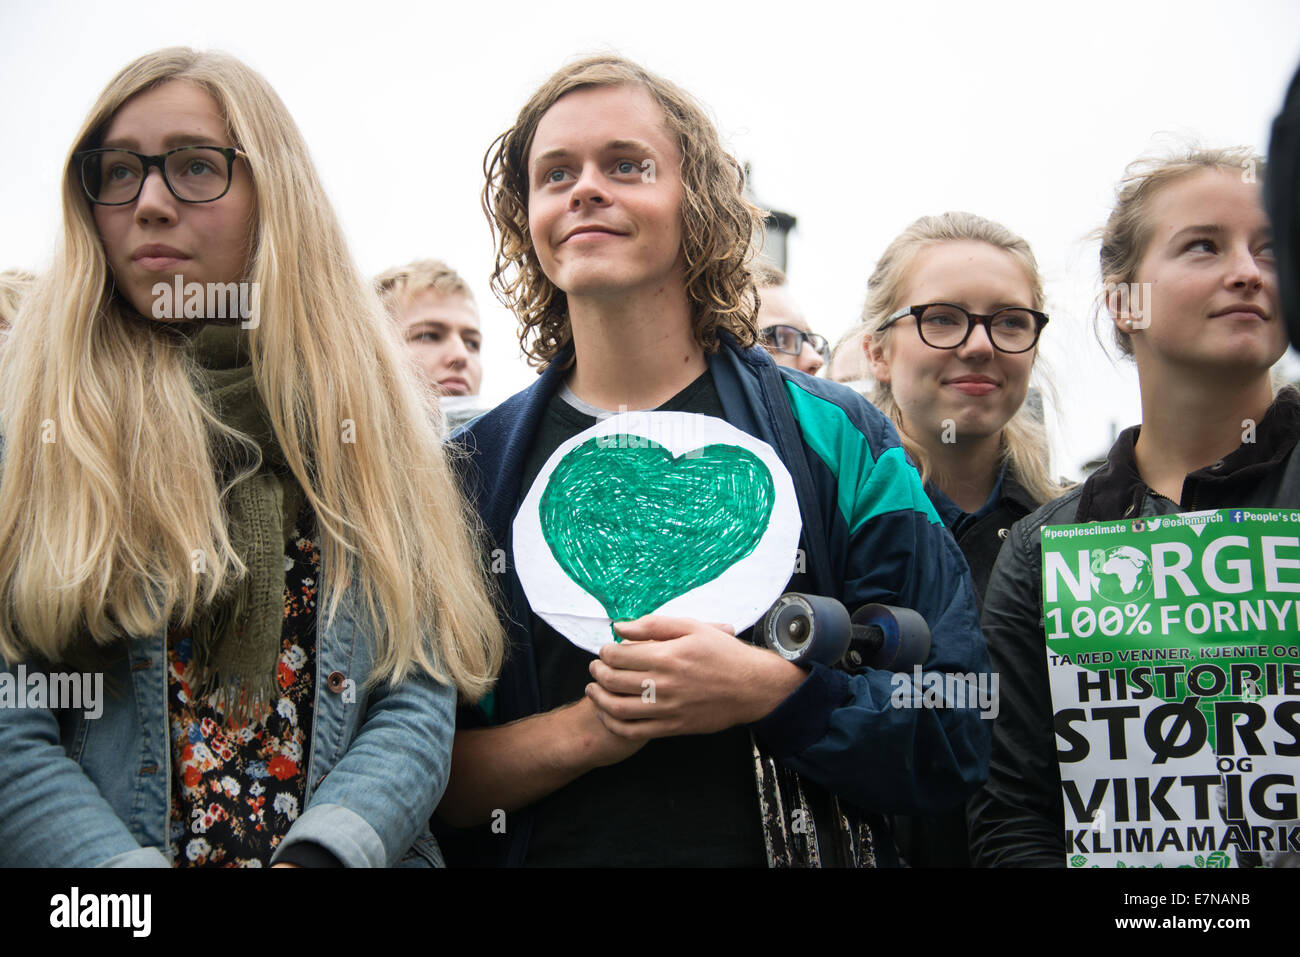 Oslo, Norway. 21st Sep, 2014. A young man carries a green heart as thousands march through downtown Oslo, Norway, to support action on global climate change, September 21, 2014. According to organizers of 'The People's Climate March', the Oslo demonstration was one of 2,808 solidarity events in 166 countries, which they claim was 'the largest climate march in history'. Credit:  Ryan Rodrick Beiler/Alamy Live News Stock Photo